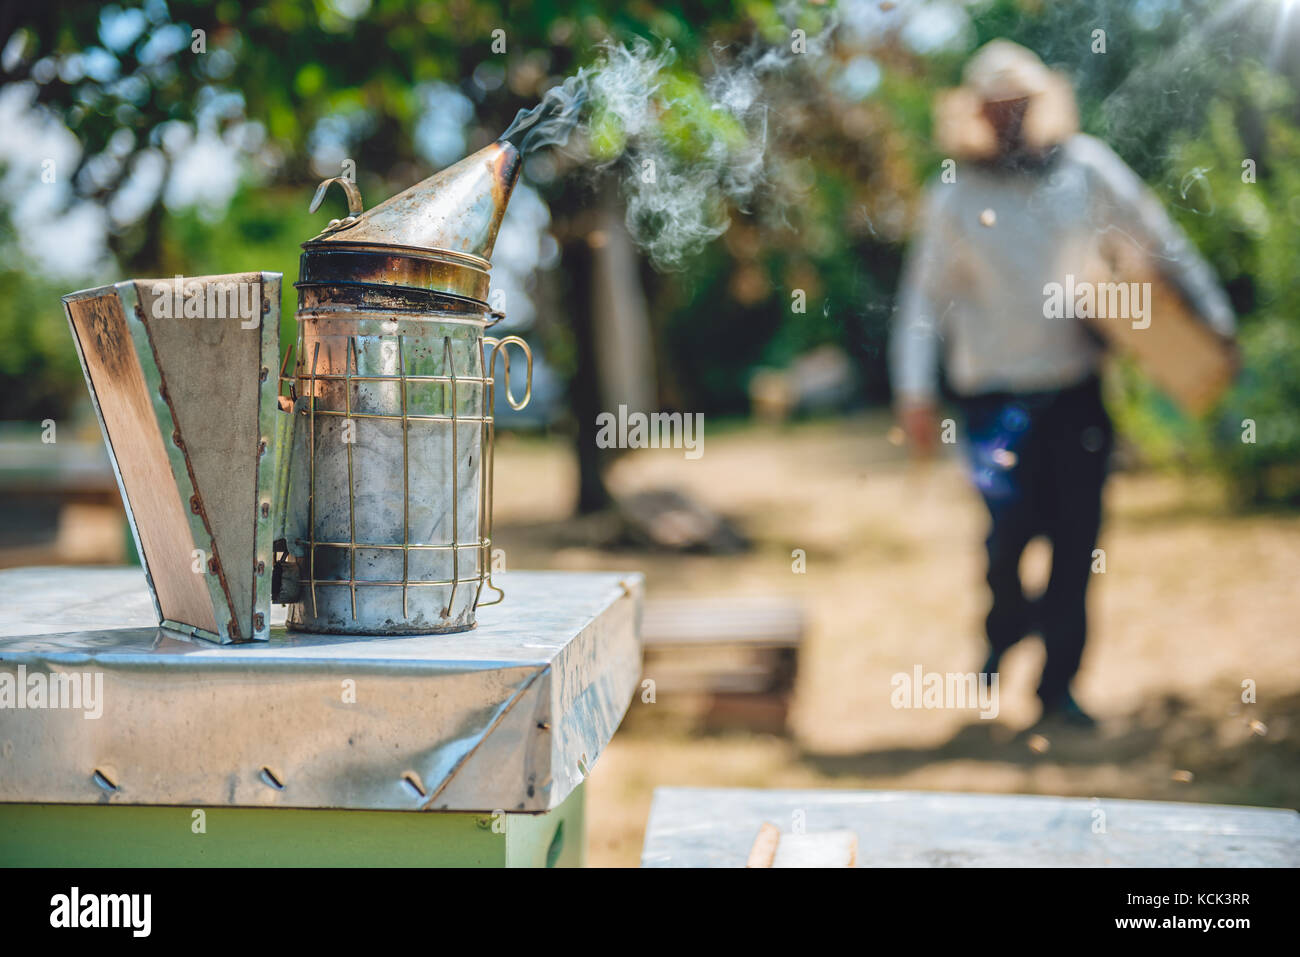 Beekeeper smoking pot standing on the hives Stock Photo